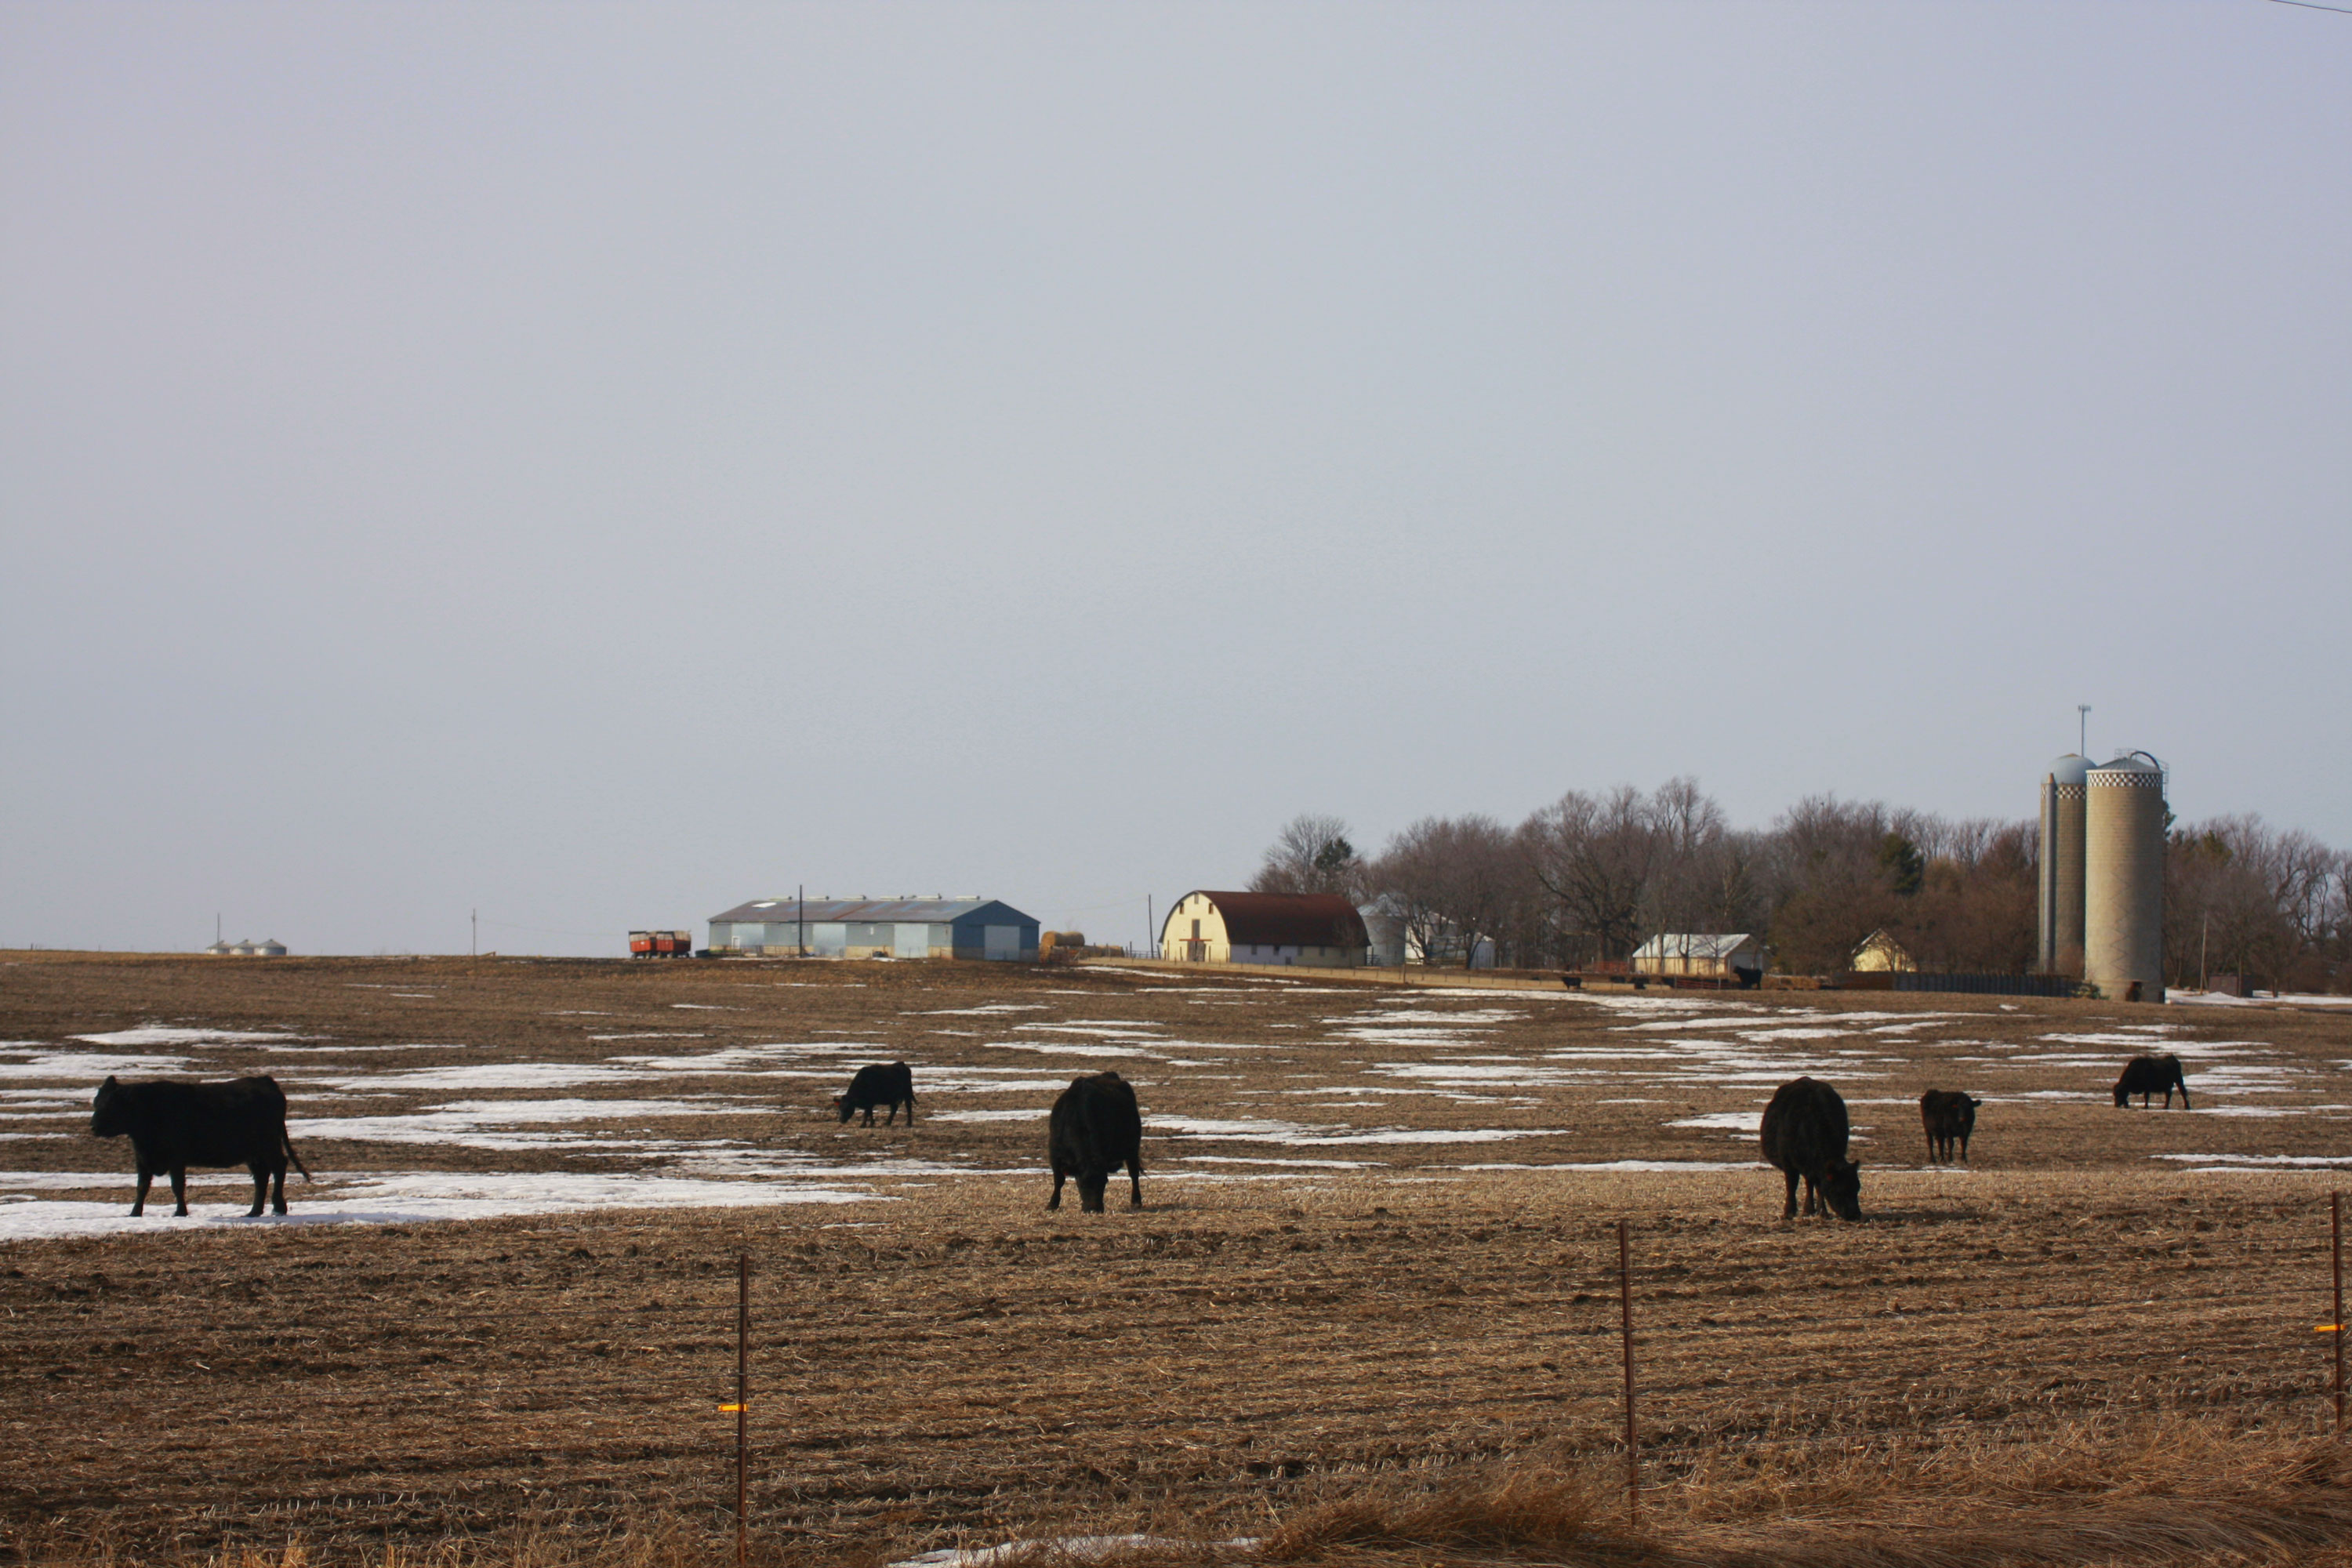 Six black cattle grazing a field with patches of snow.